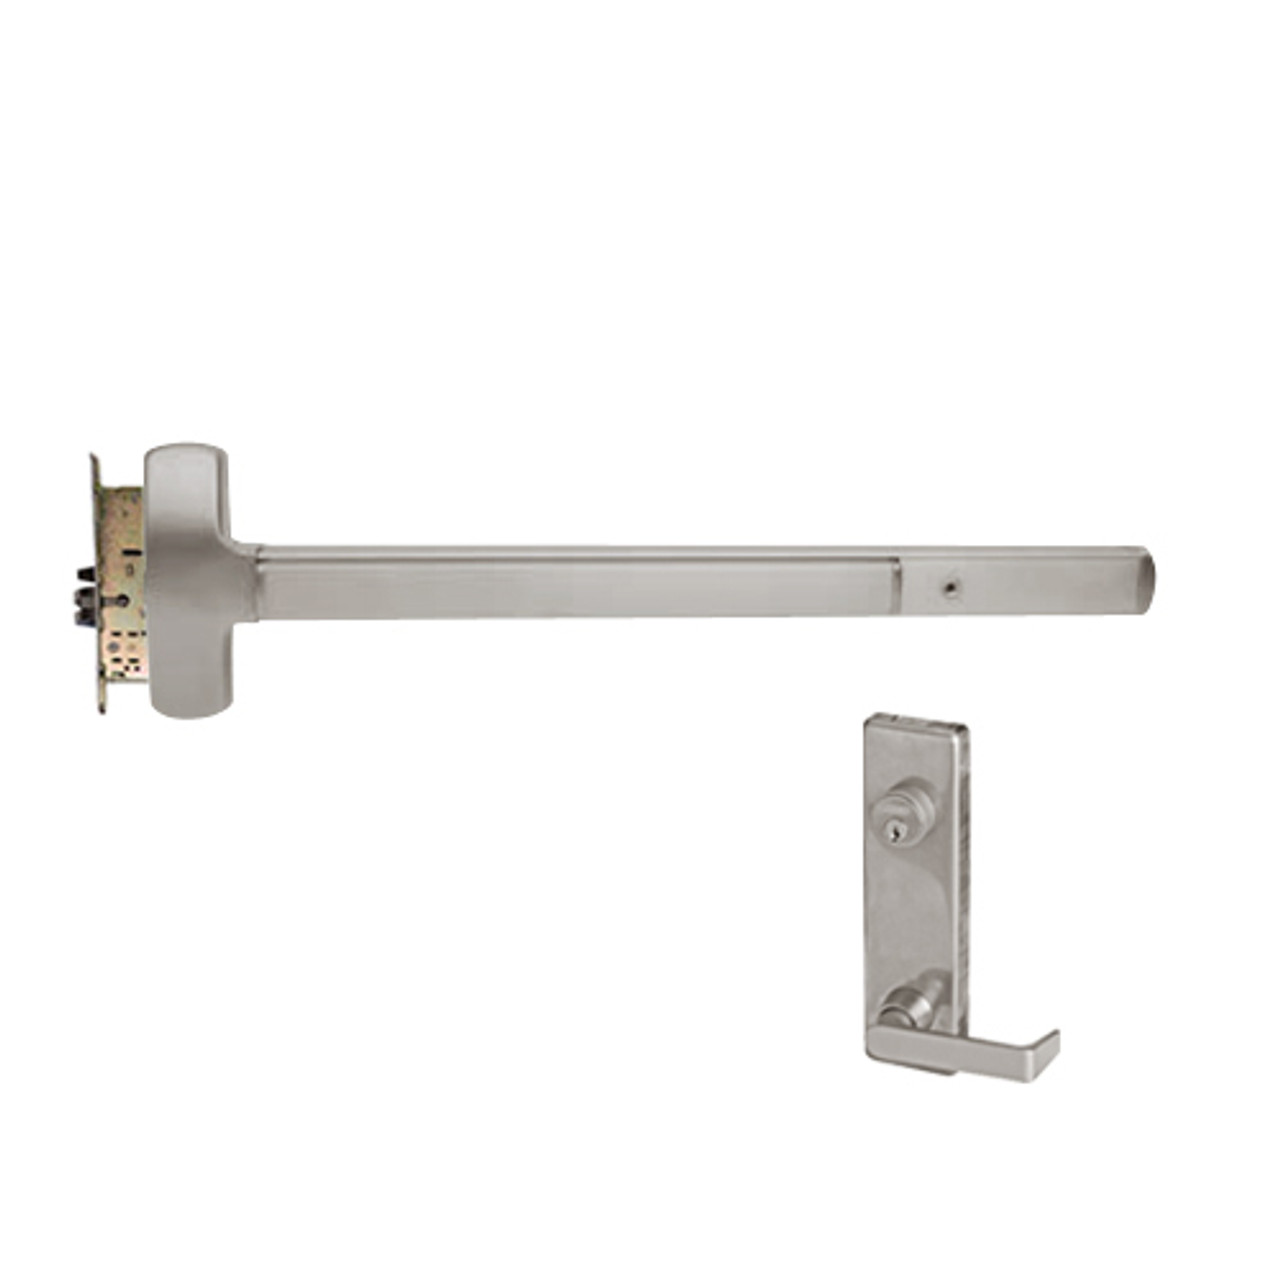 25-M-L-NL-DANE-US32D-4-LHR Falcon Exit Device in Satin Stainless Steel